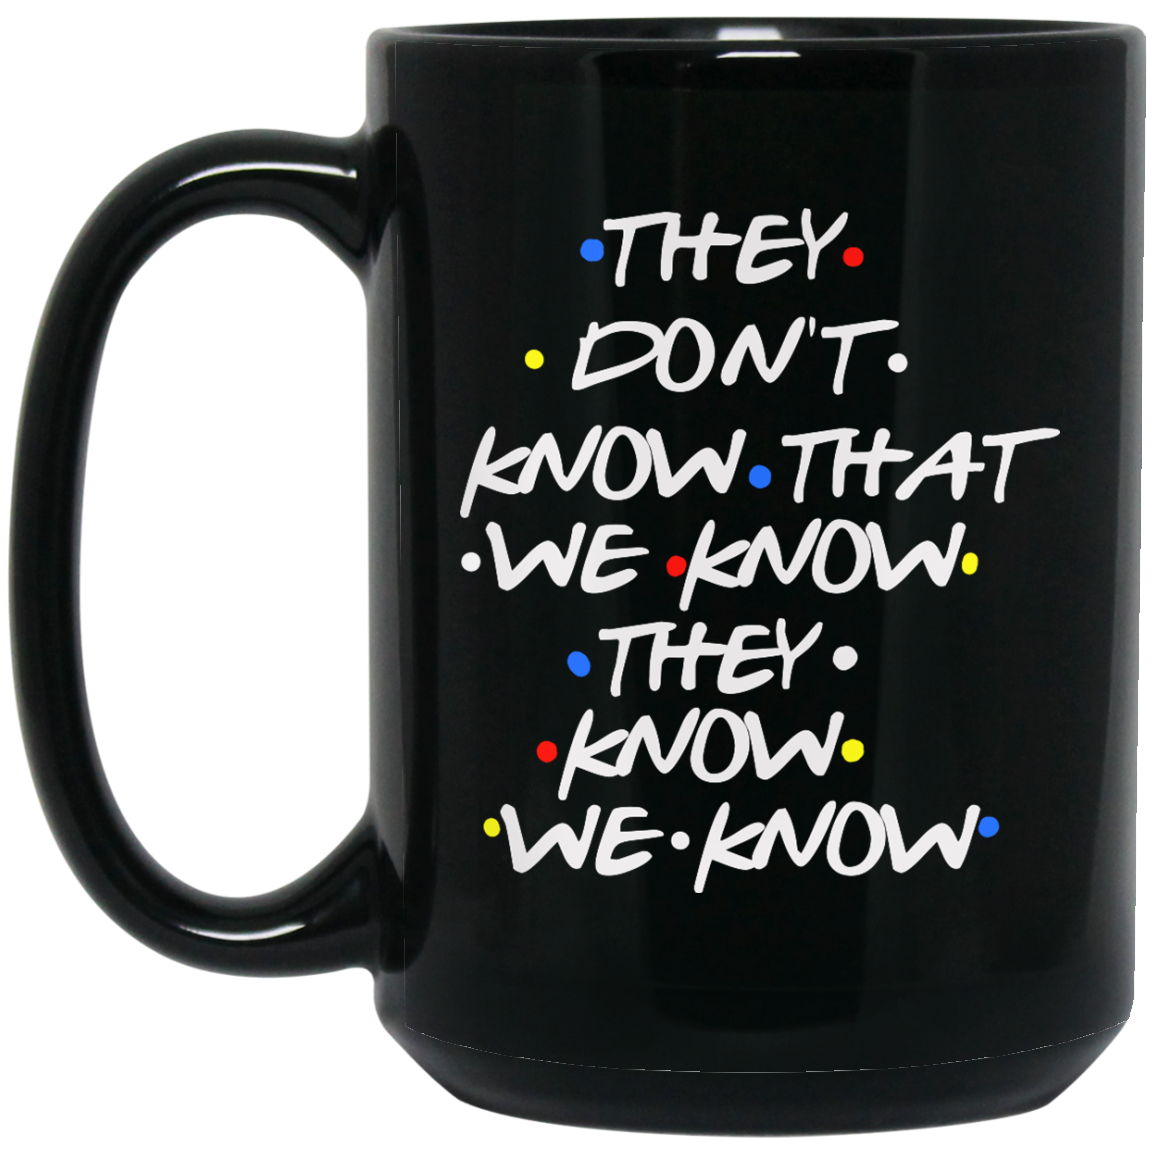 Friends: they don't know that we know they know we know mugs